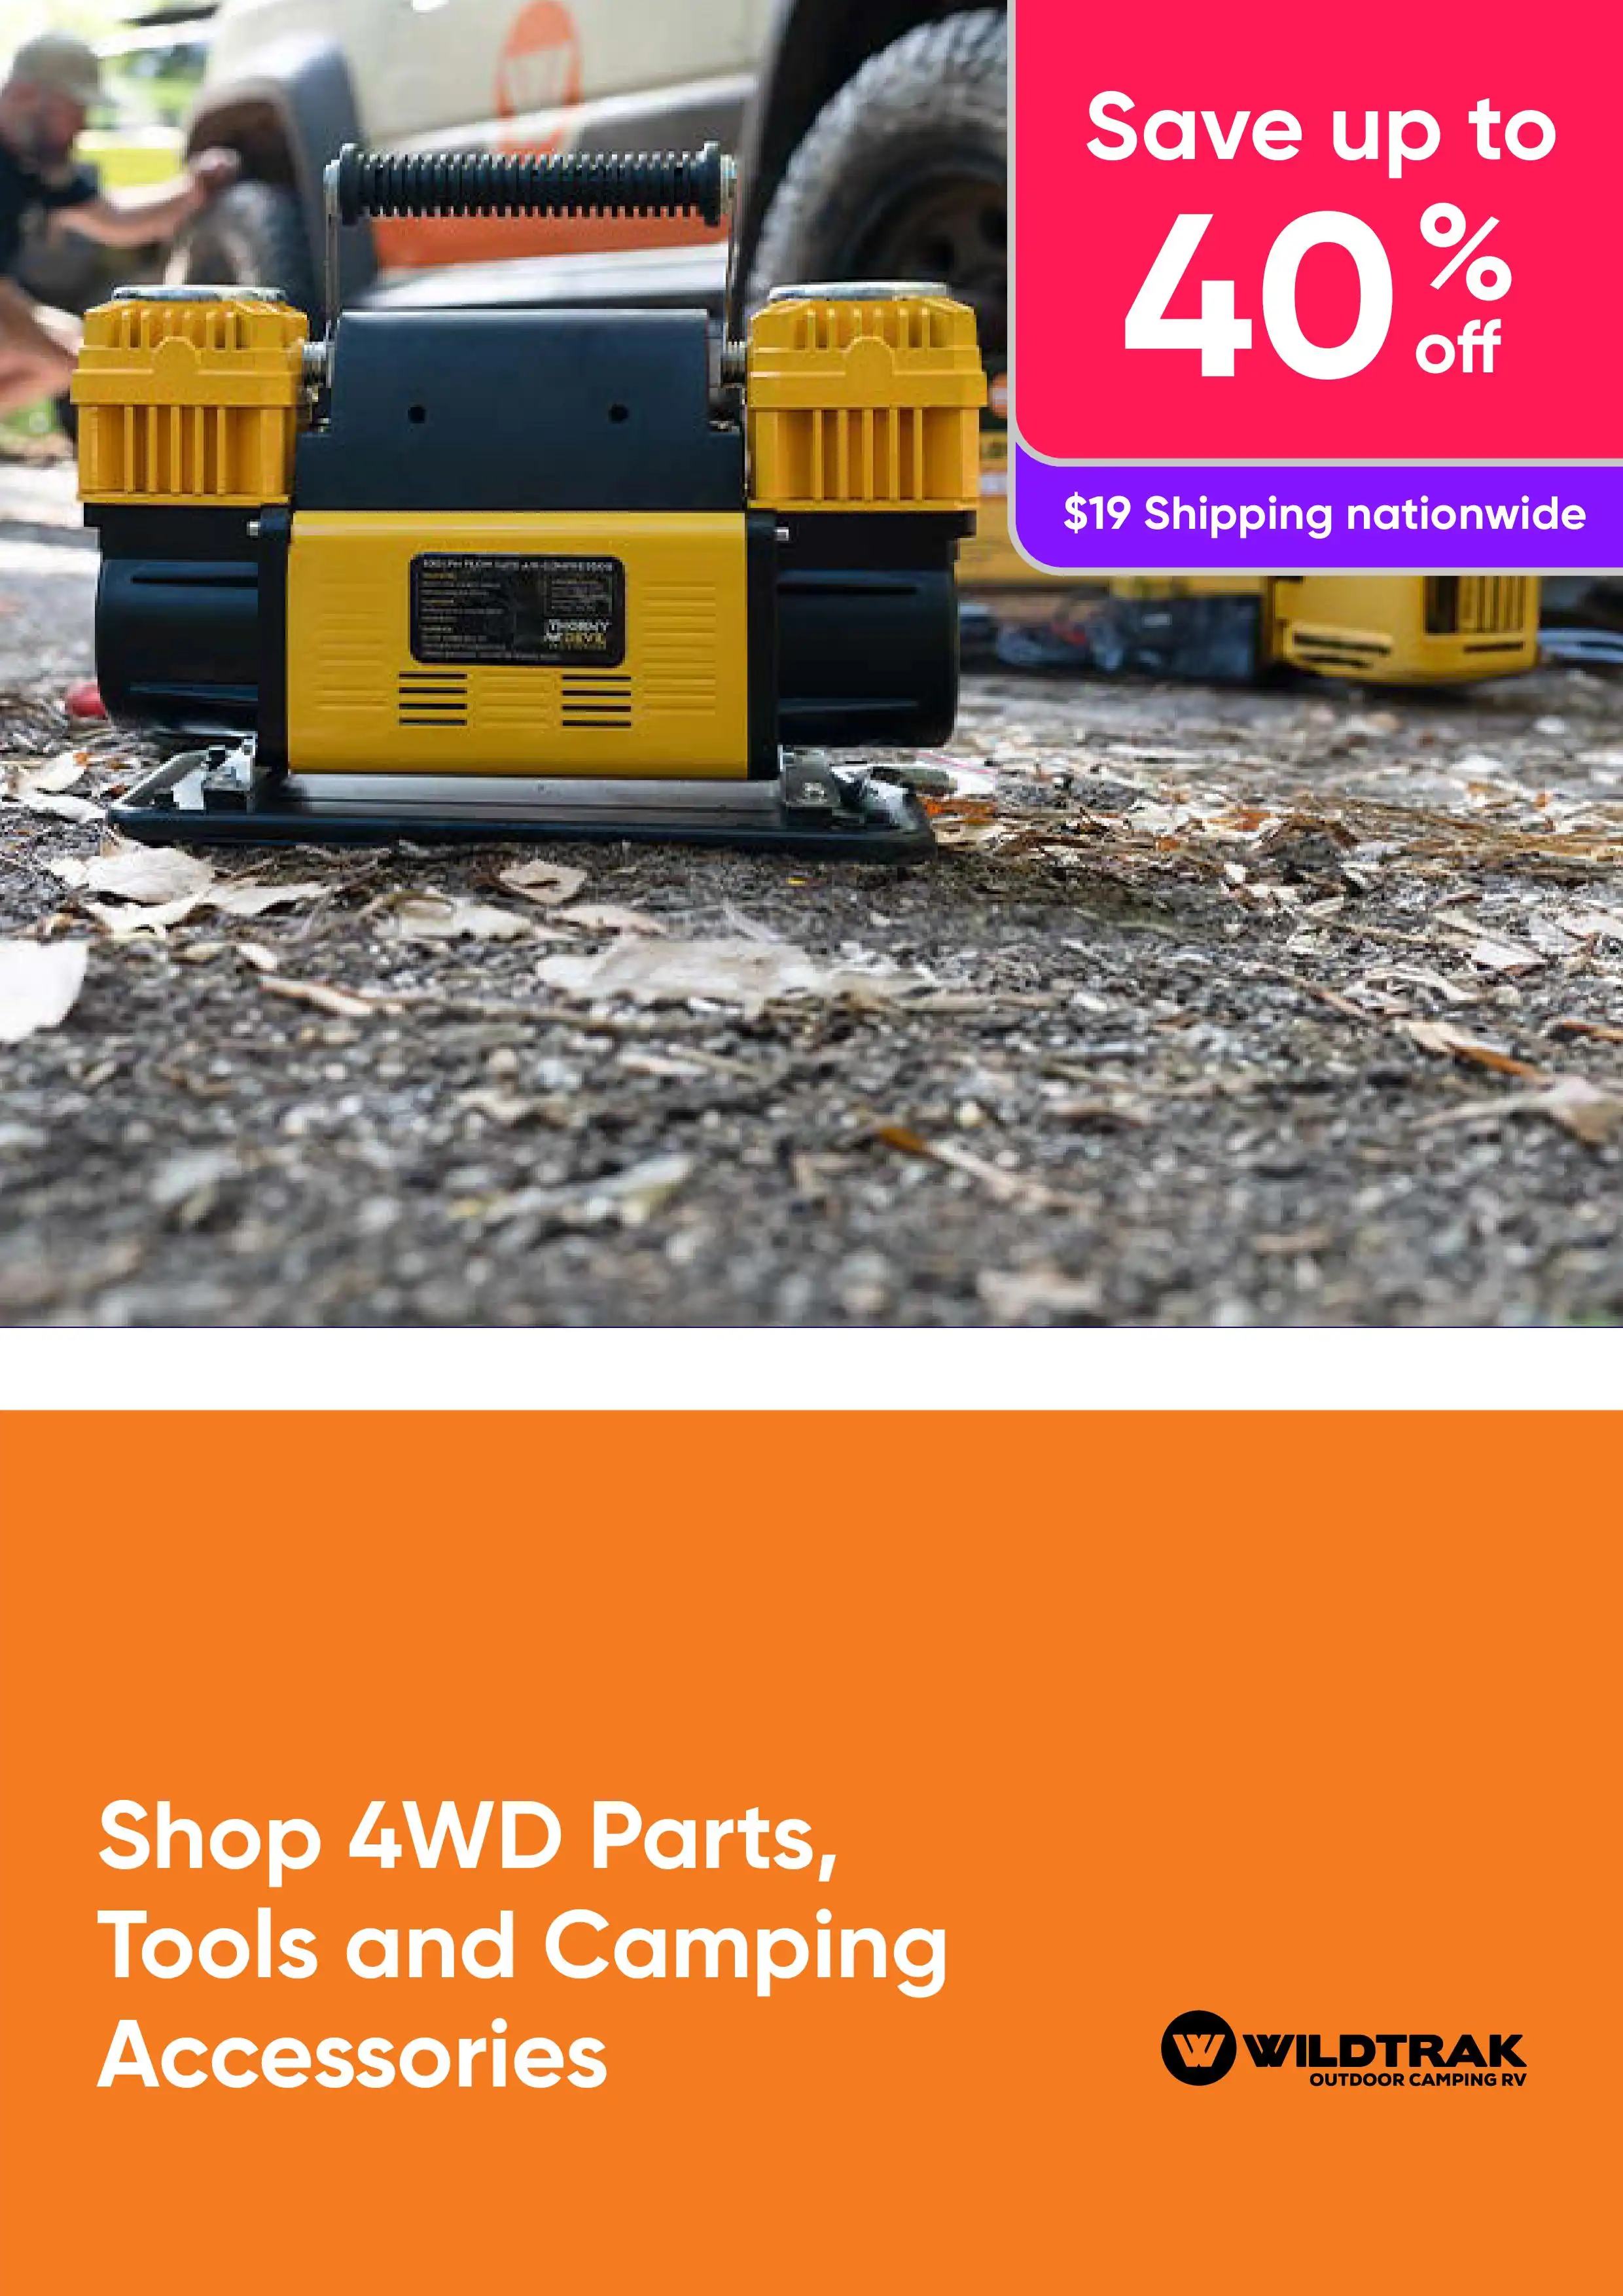 Outdoor Auto Sale - Save Up to 40% on 4WD Parts, Tools and Camping Accessories